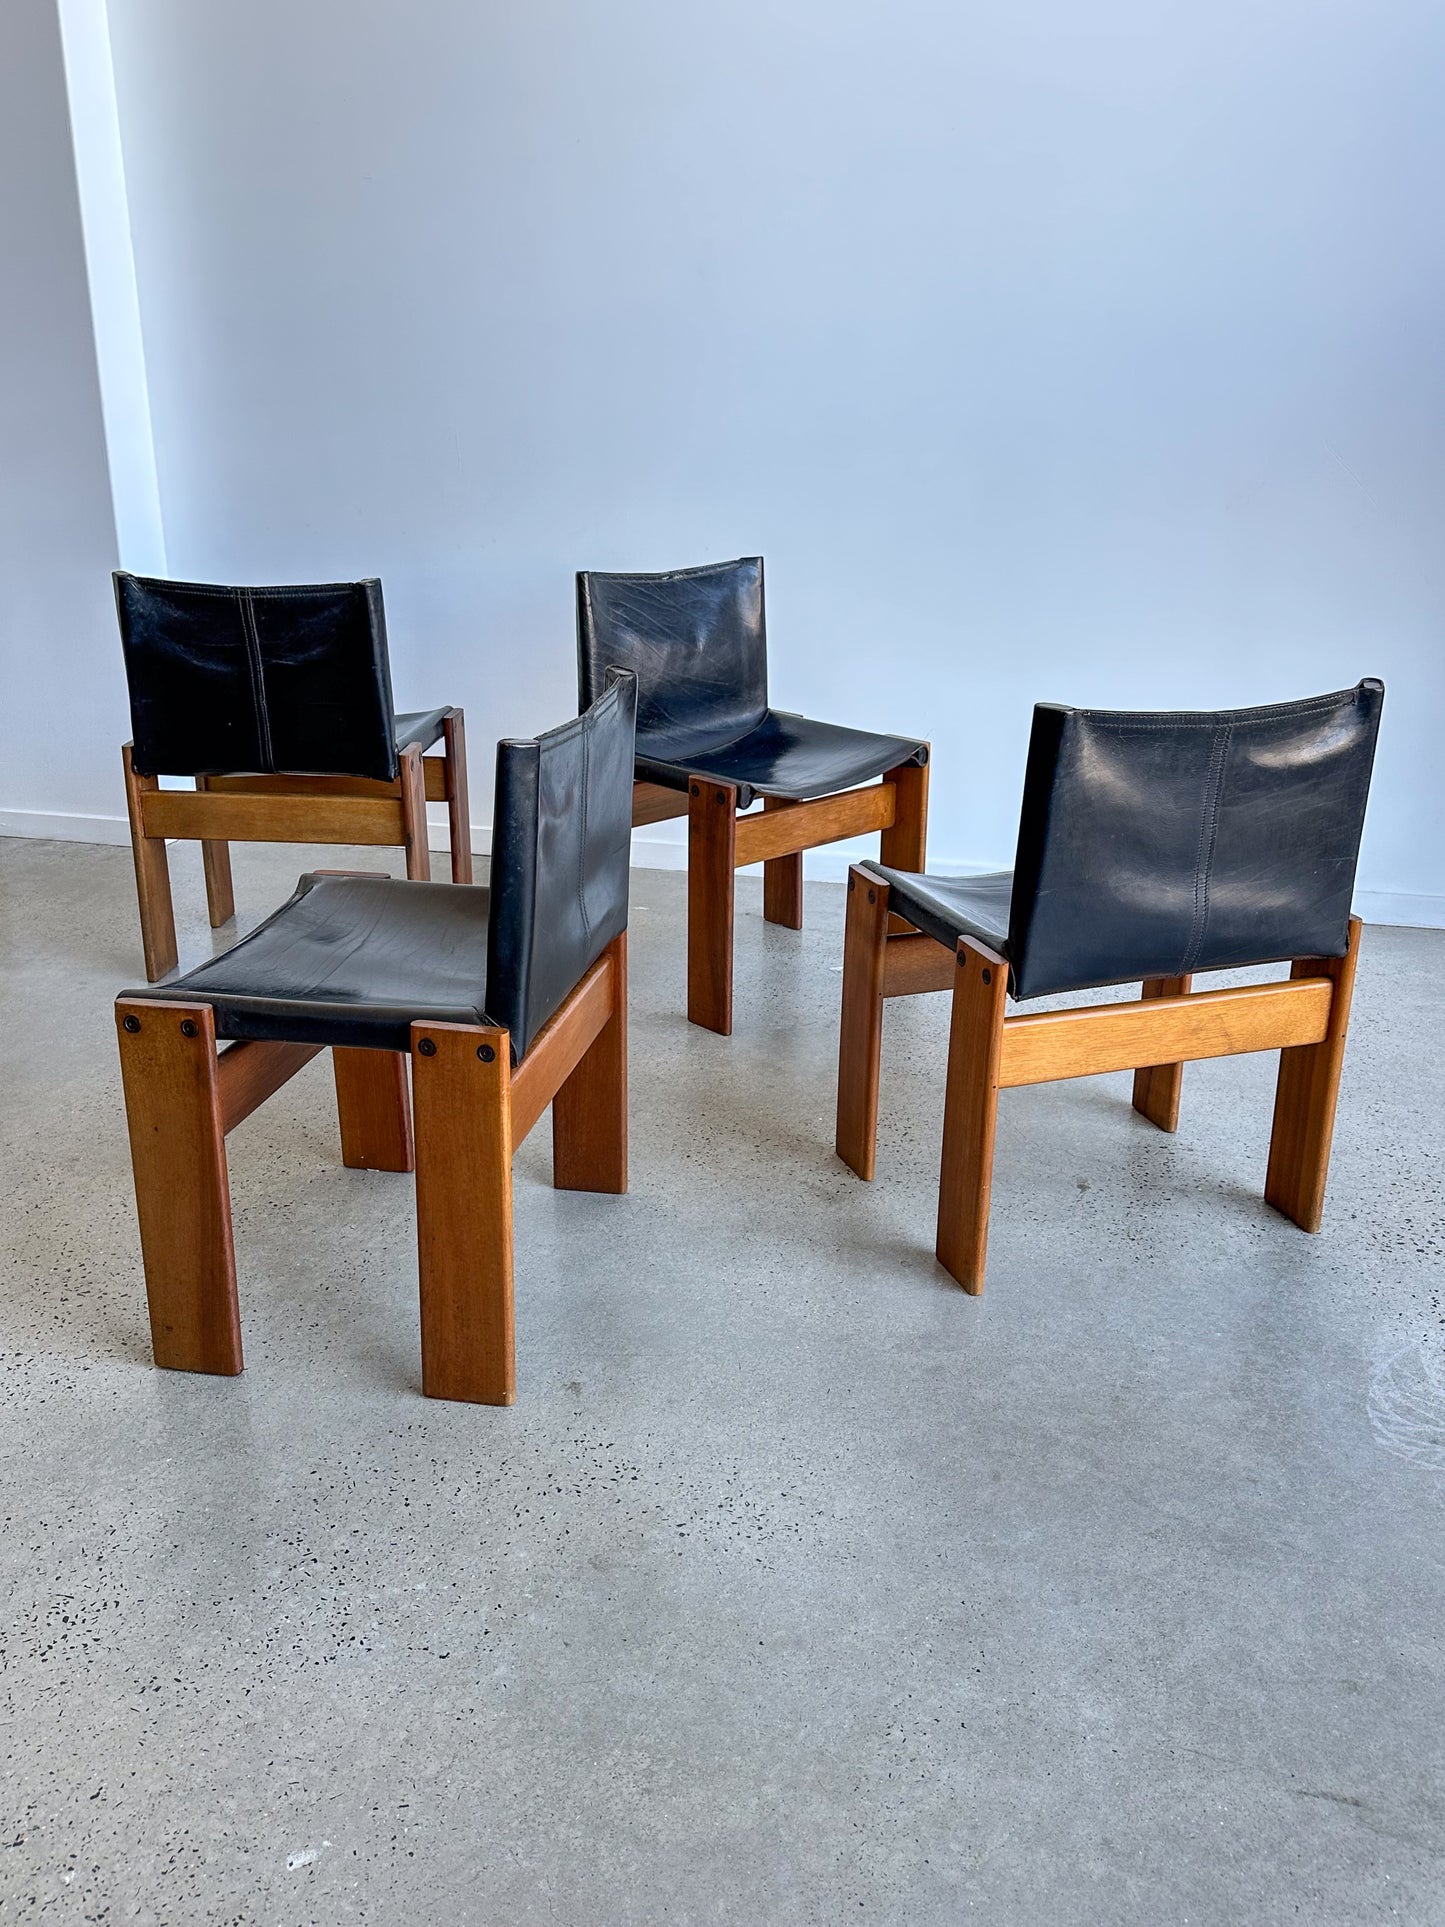 "Monk" Set of Four Black Leather & Walnut Timber Chairs by Afra and Tobia Scarpa for Molteni